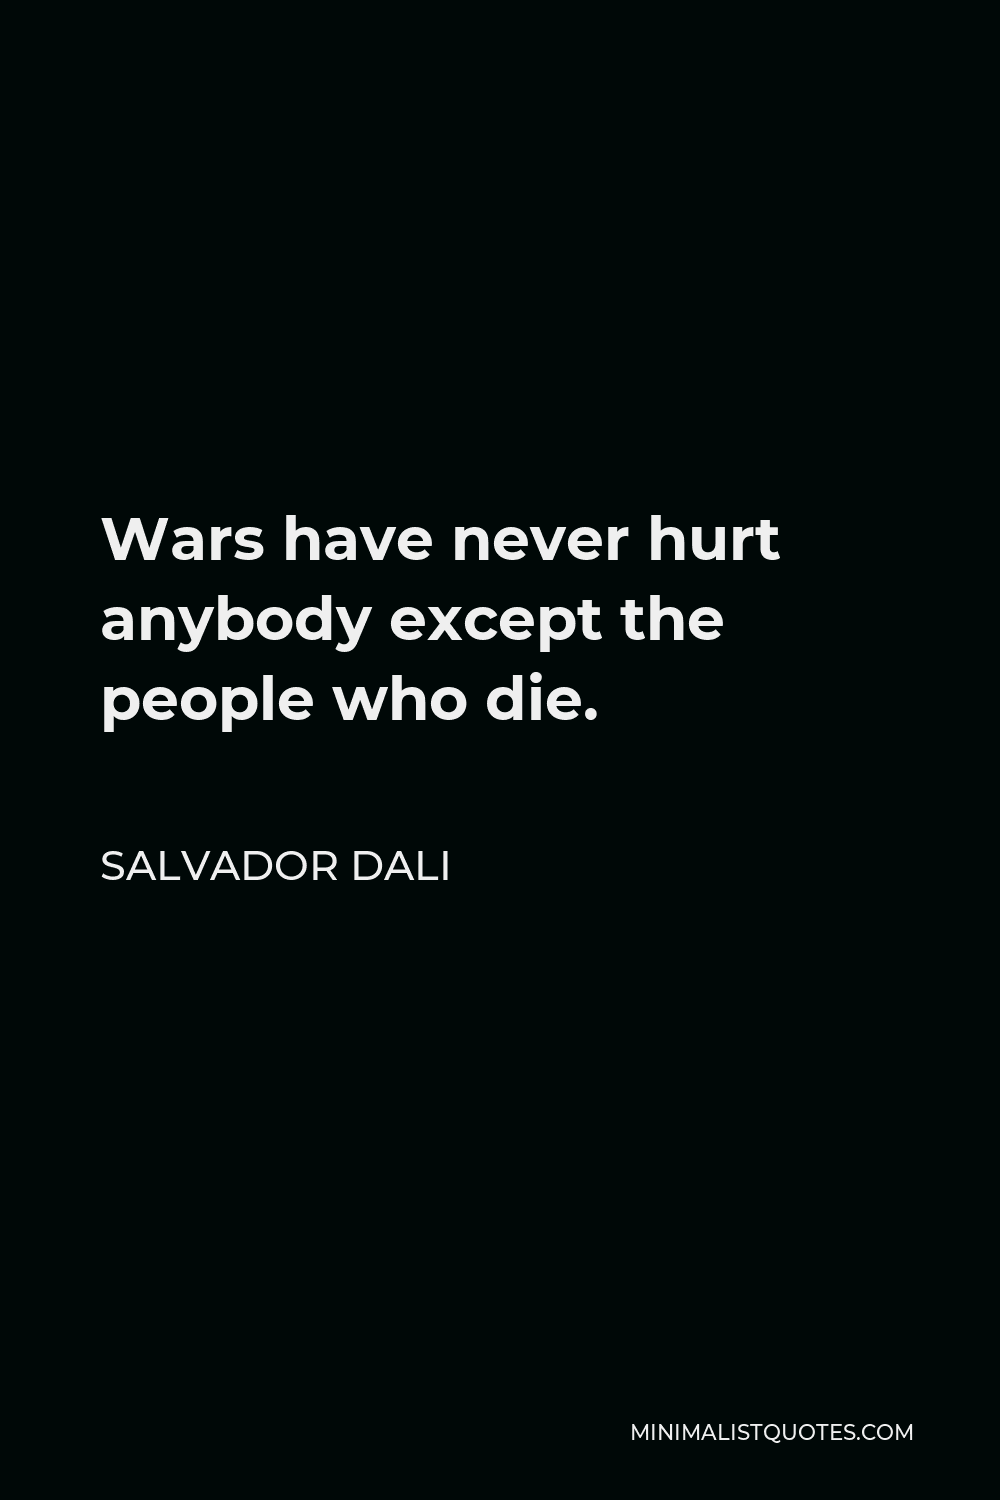 Salvador Dali Quote - Wars have never hurt anybody except the people who die.